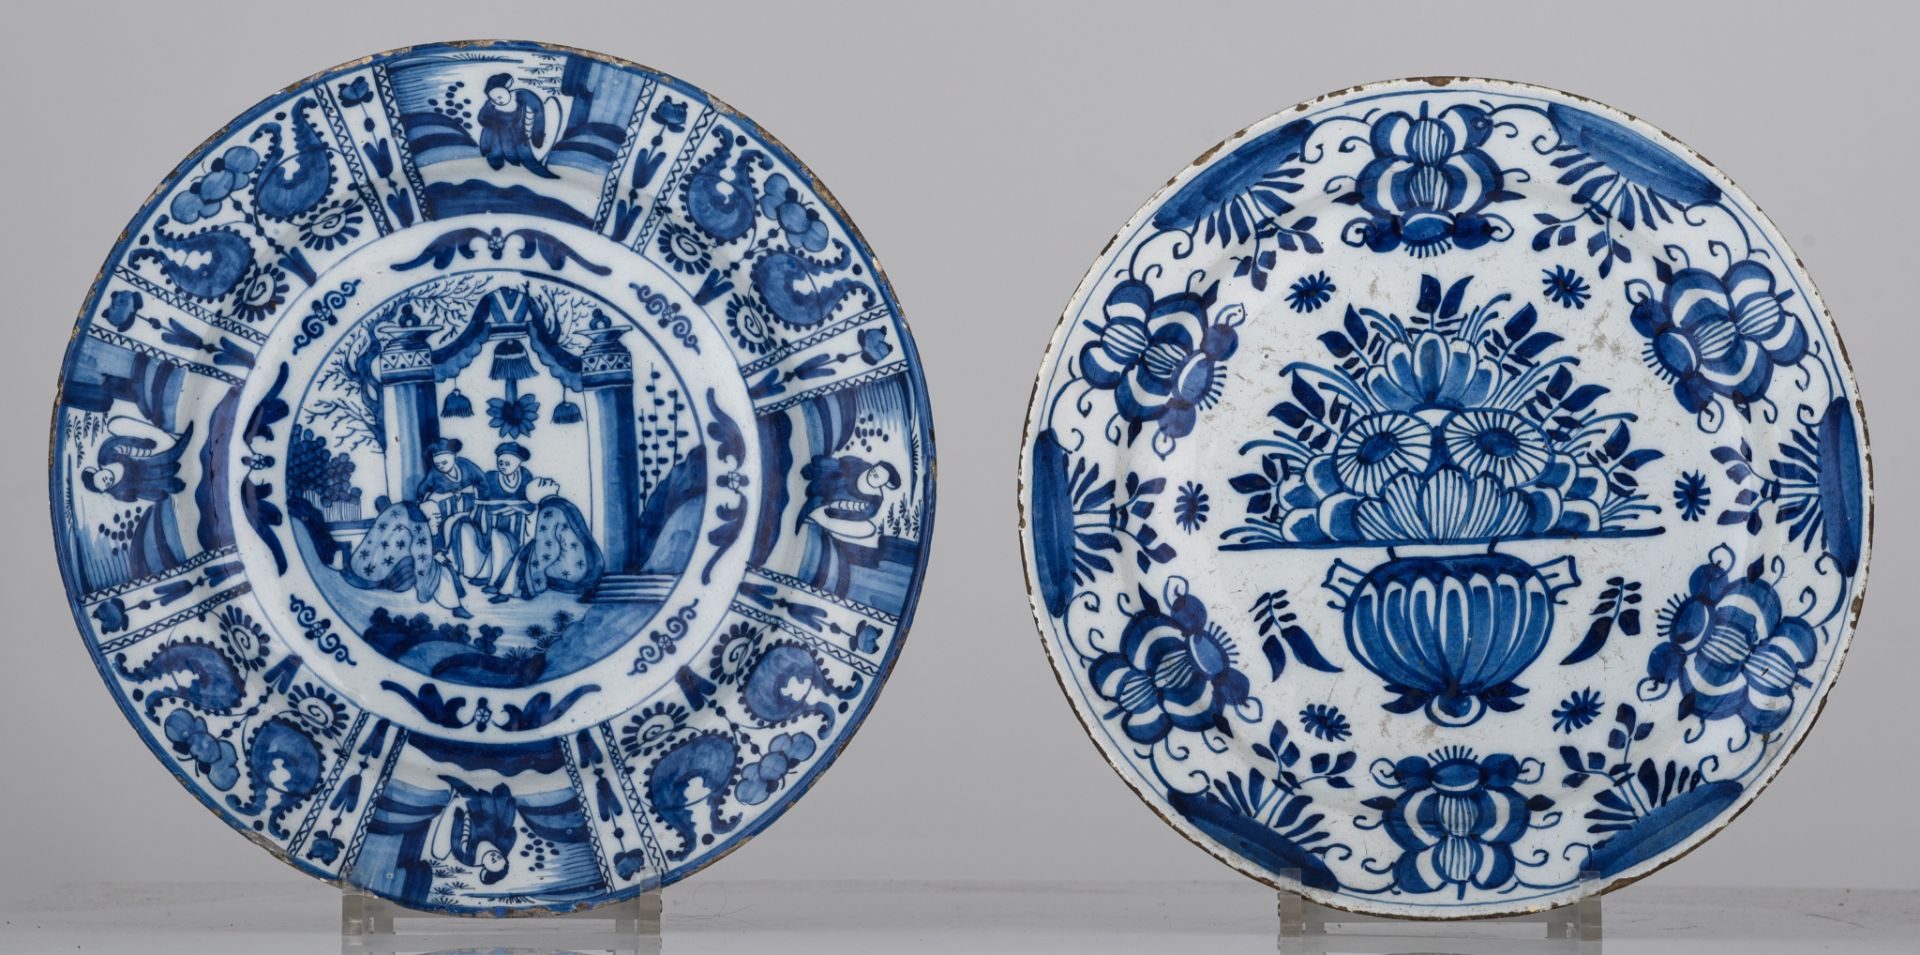 (BIDDING ONLY ON CARLOBONTE.BE) Two blue and white Delft chargers, 18thC, ¯ 34 - 35,5 cm - Image 2 of 6